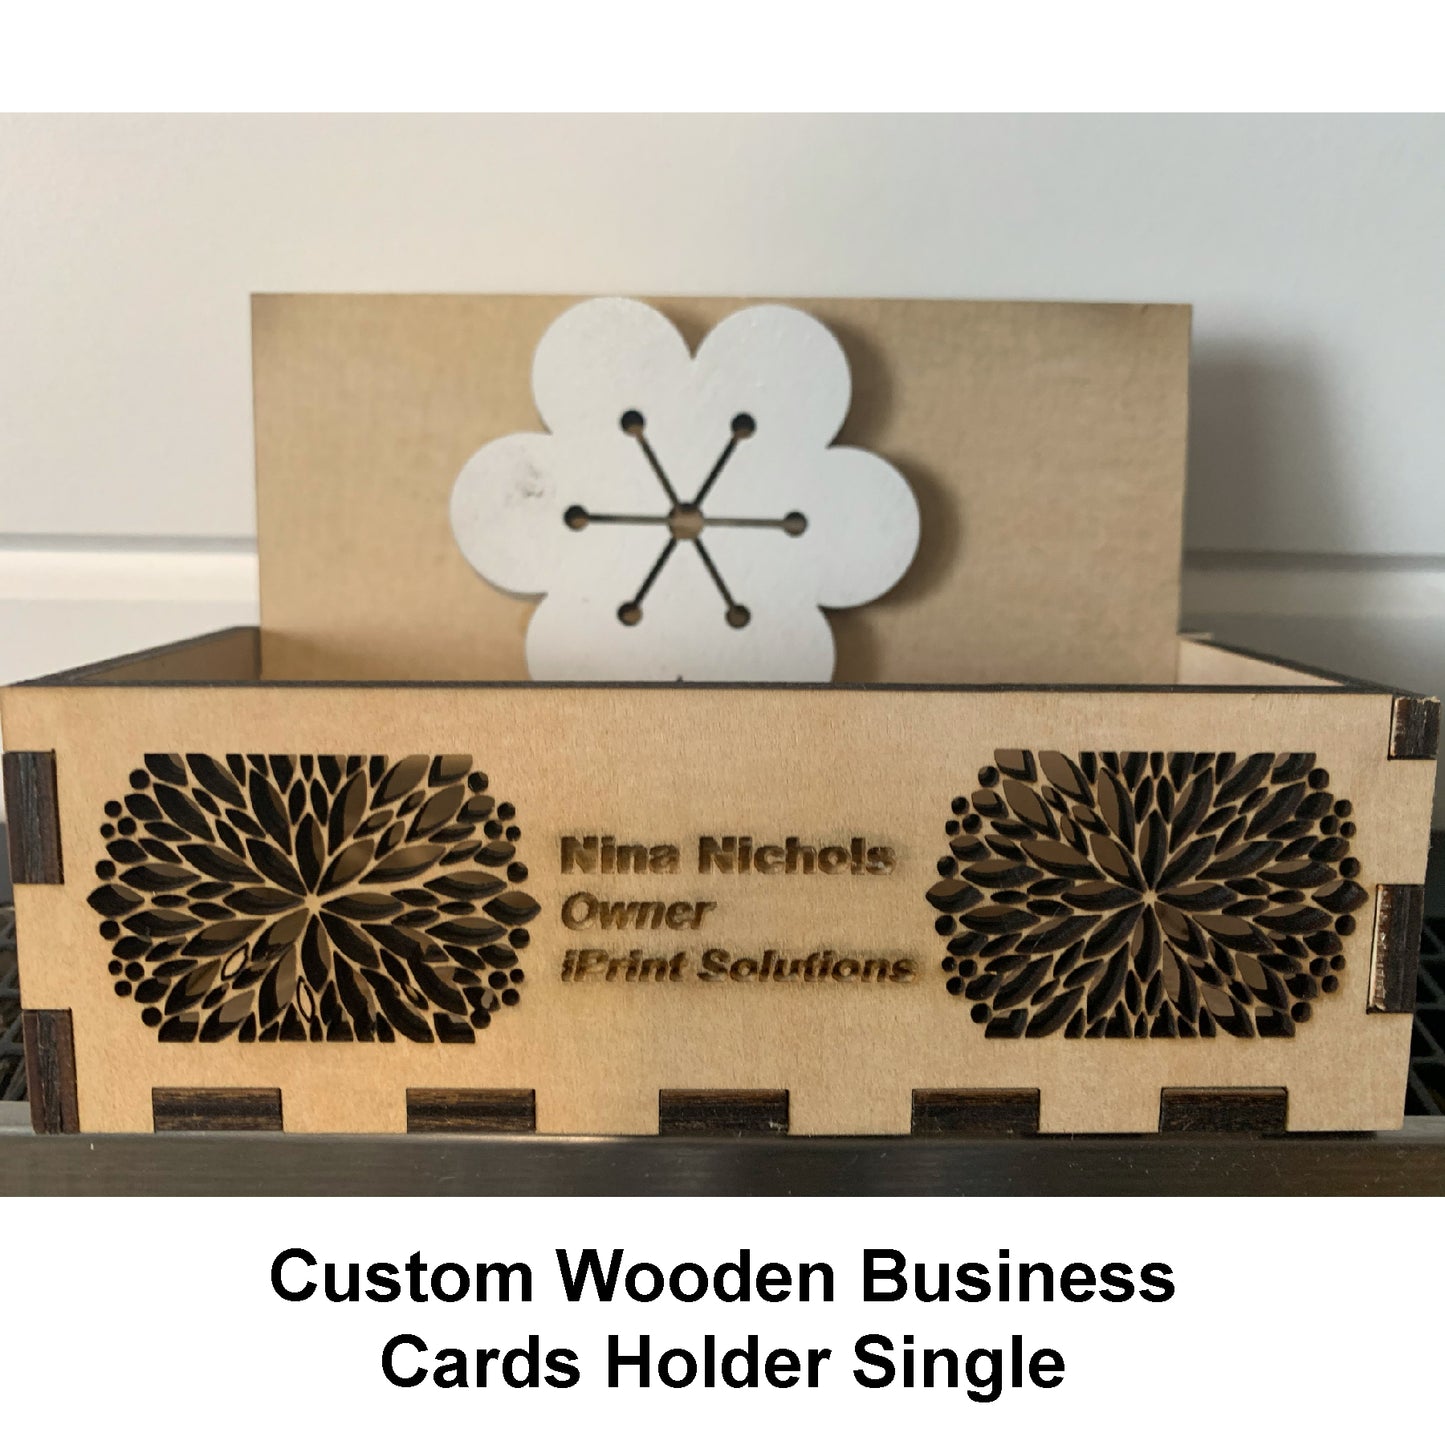 Handcrafted wood business card display, business cards holder, custom box, custom business cards holder, wood holder, wood business cards display